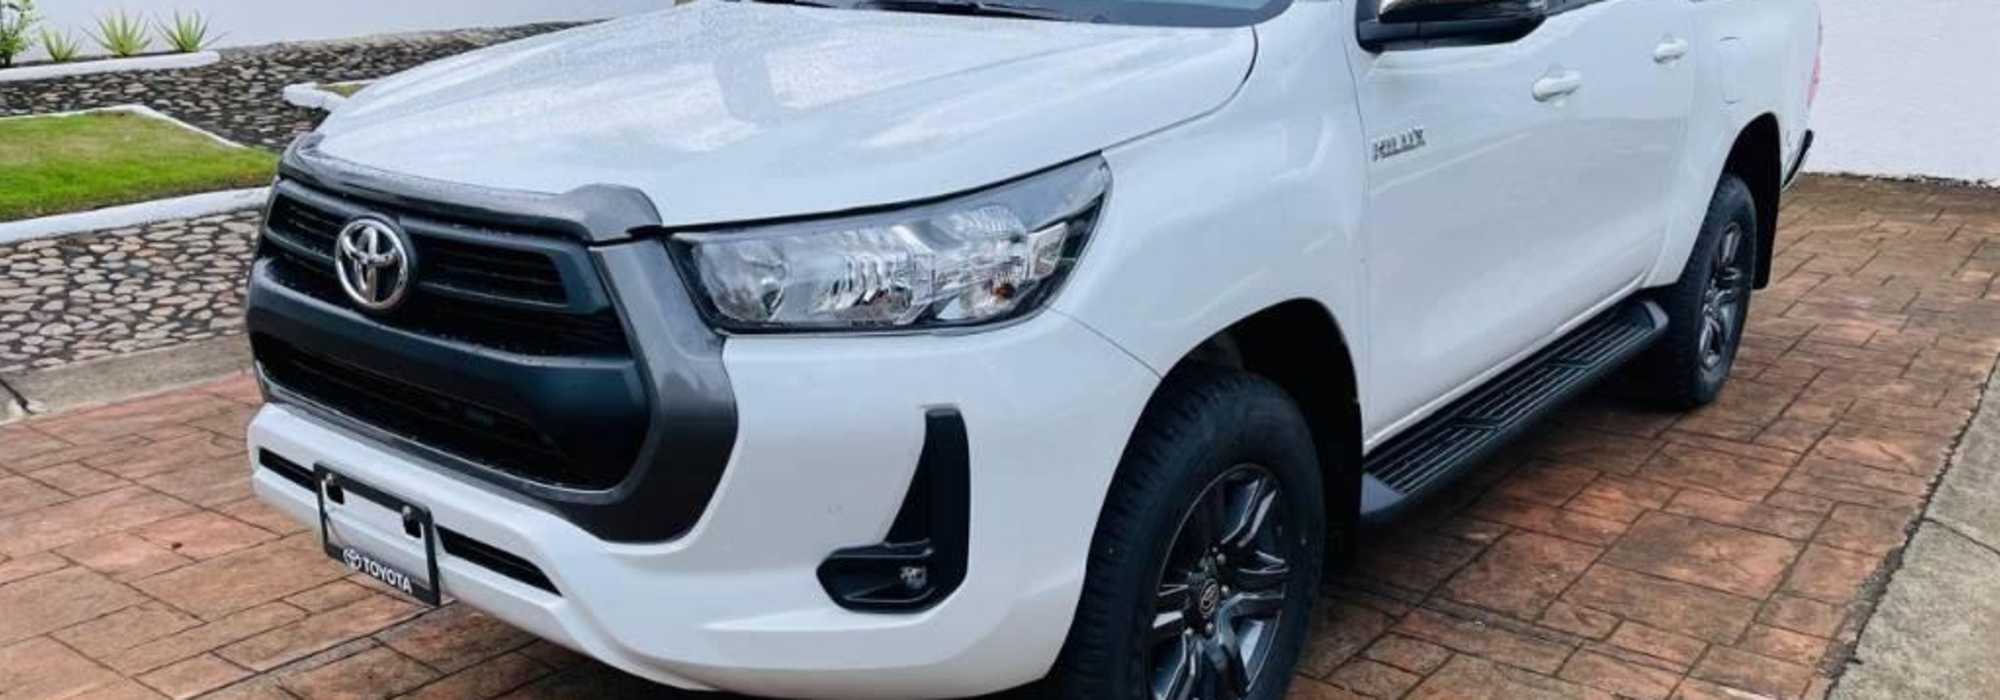 Toyota Hilux from Bless Buy Ni